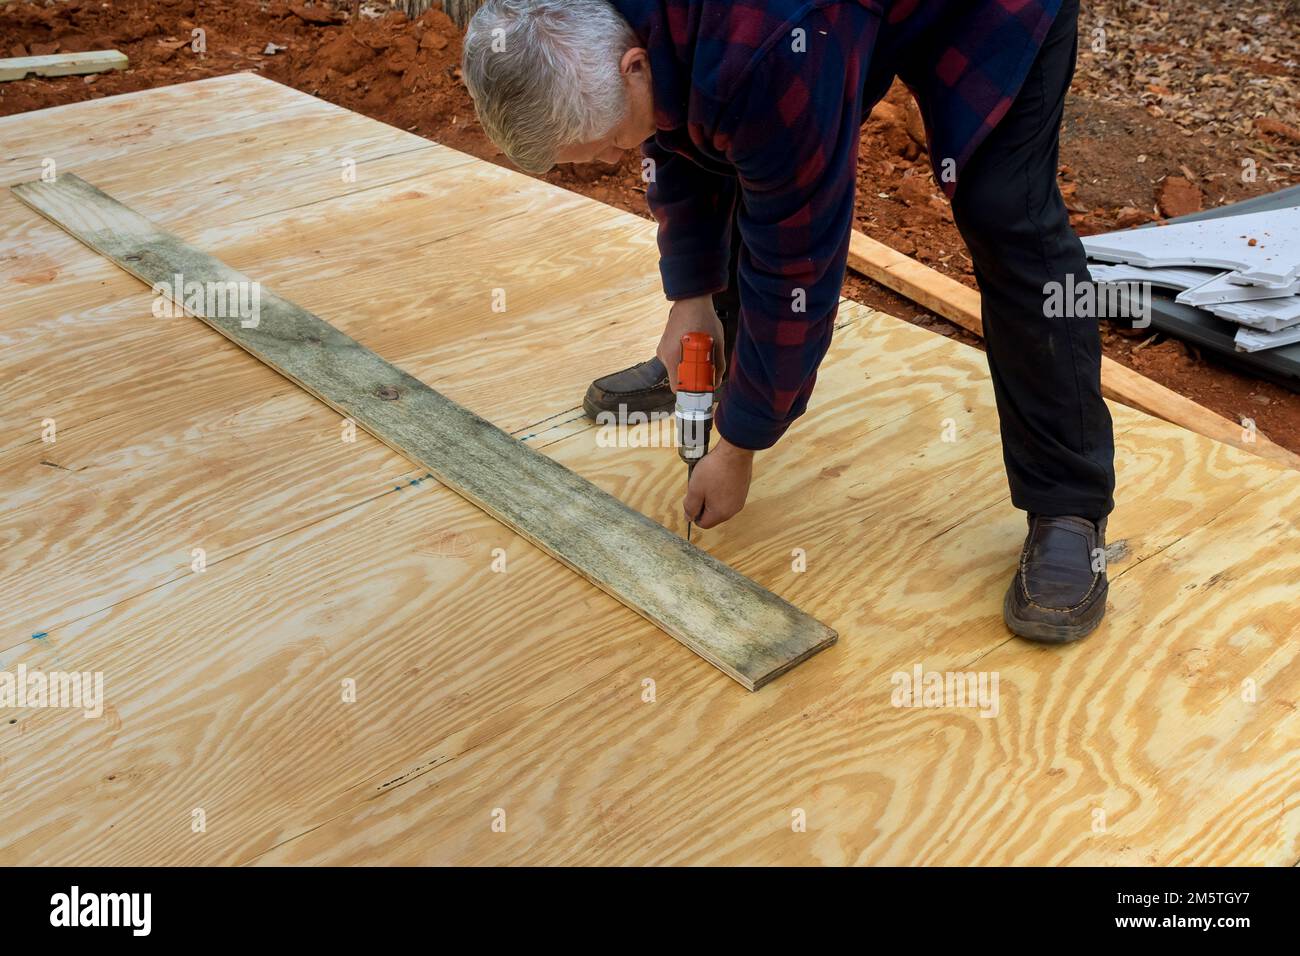 Foundation of the shed deck is built from wood framing beams stick framework Stock Photo